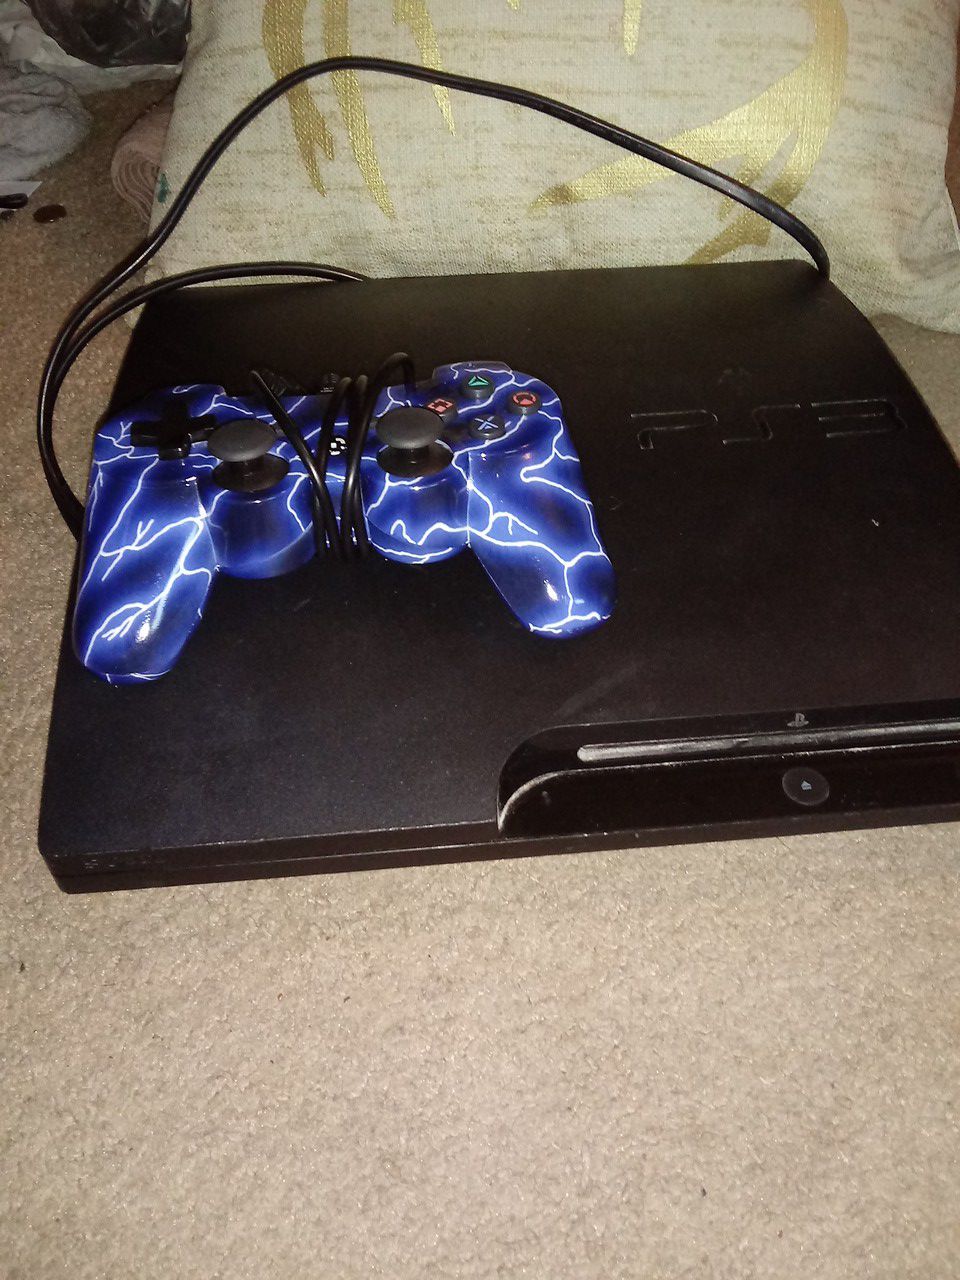 Ps3 for Sale